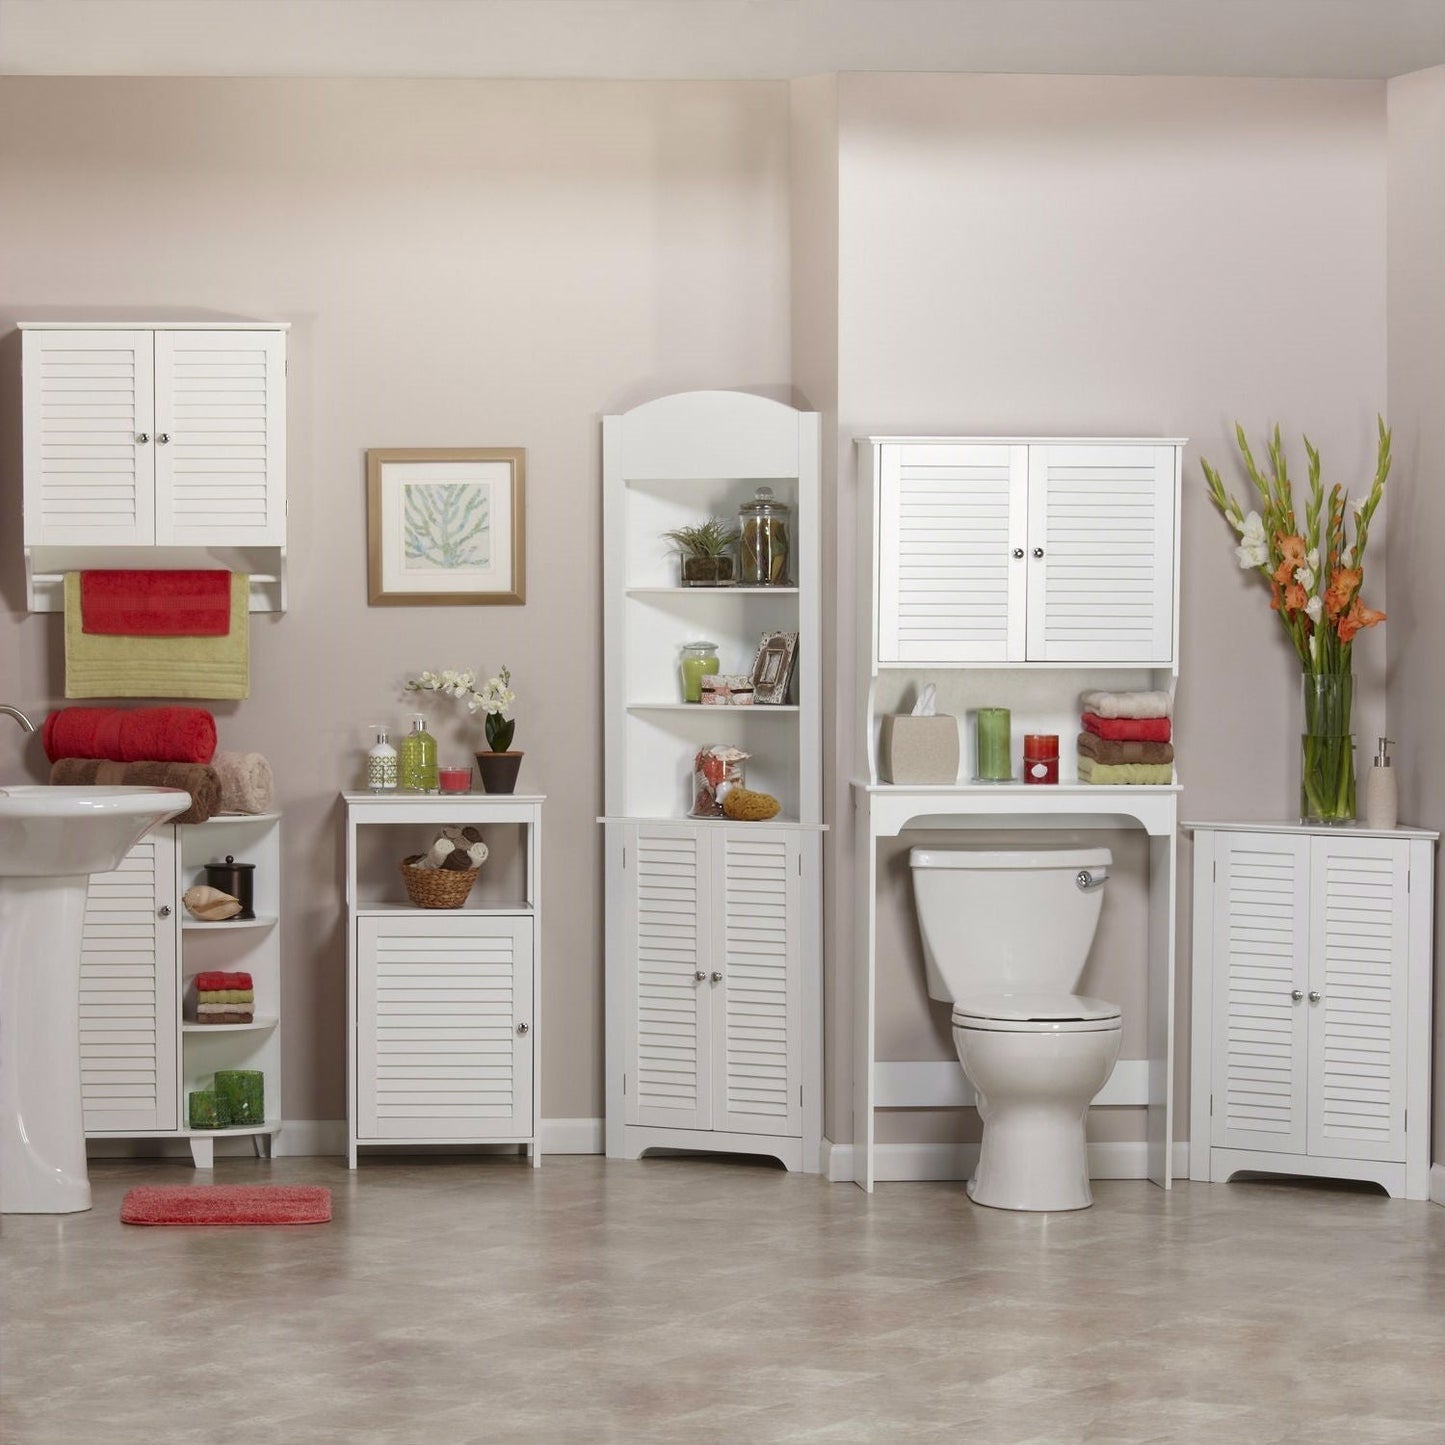 Bathroom > Bathroom Cabinets - White Bathroom Wall Cabinet With 2 Louver Shutter Doors And Shelf